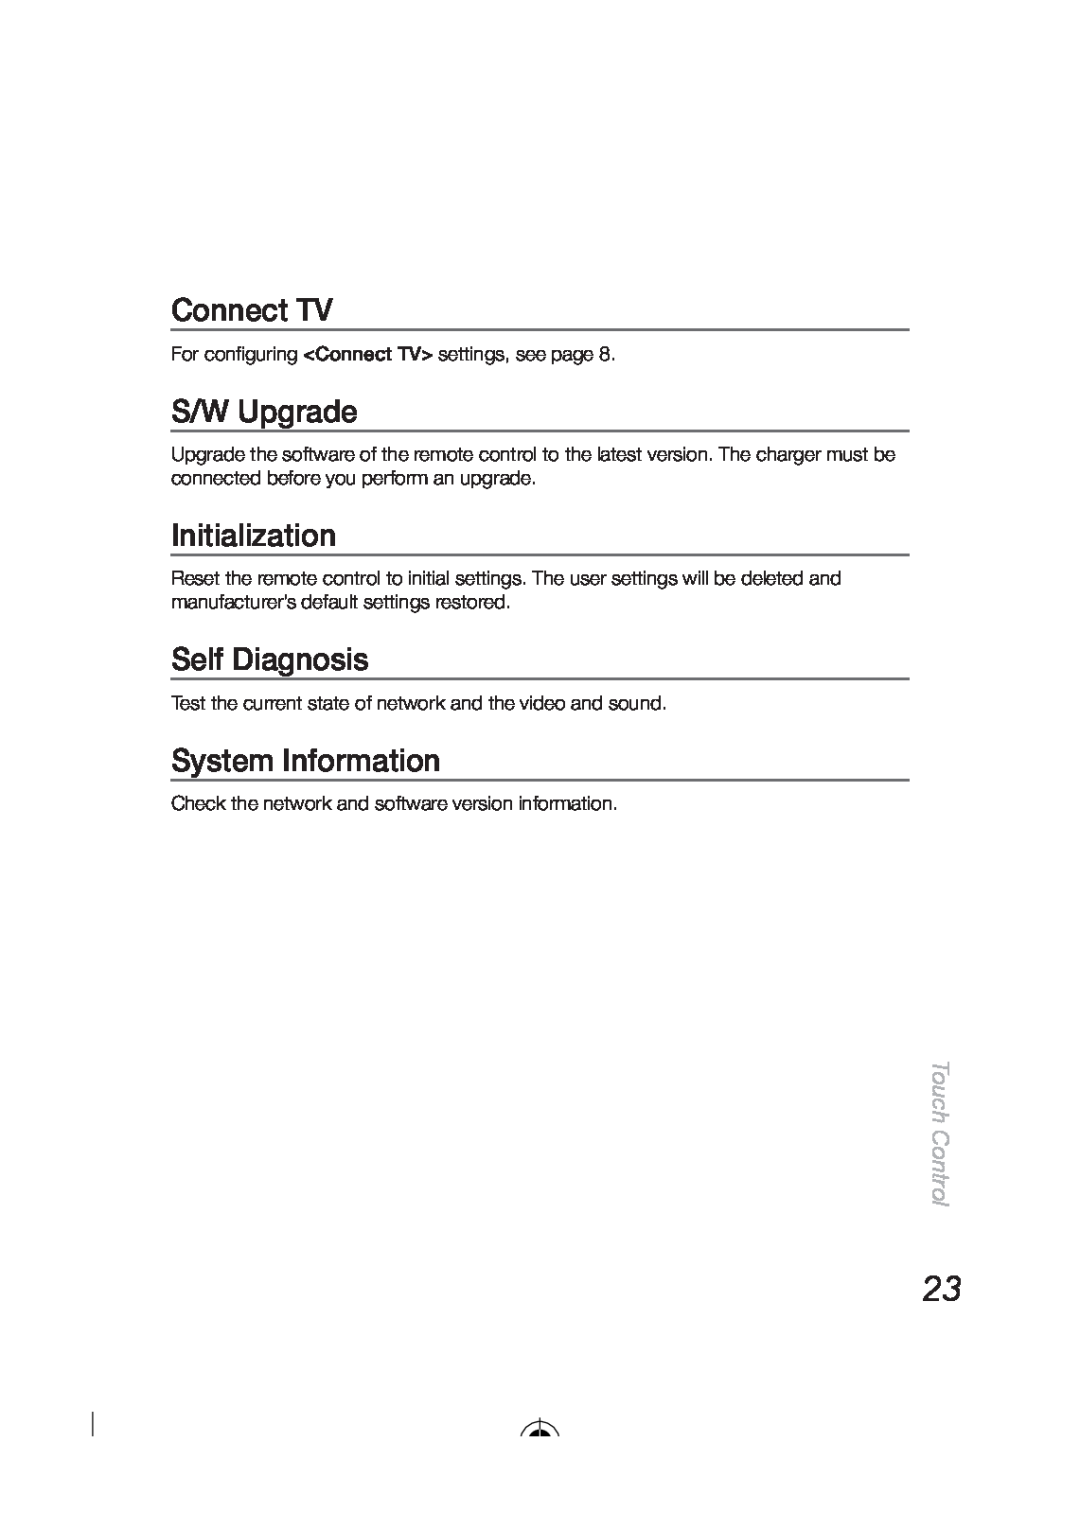 Samsung LED-C9000 user manual Connect TV, S/W Upgrade, Initialization, Self Diagnosis, System Information, Touch Control 